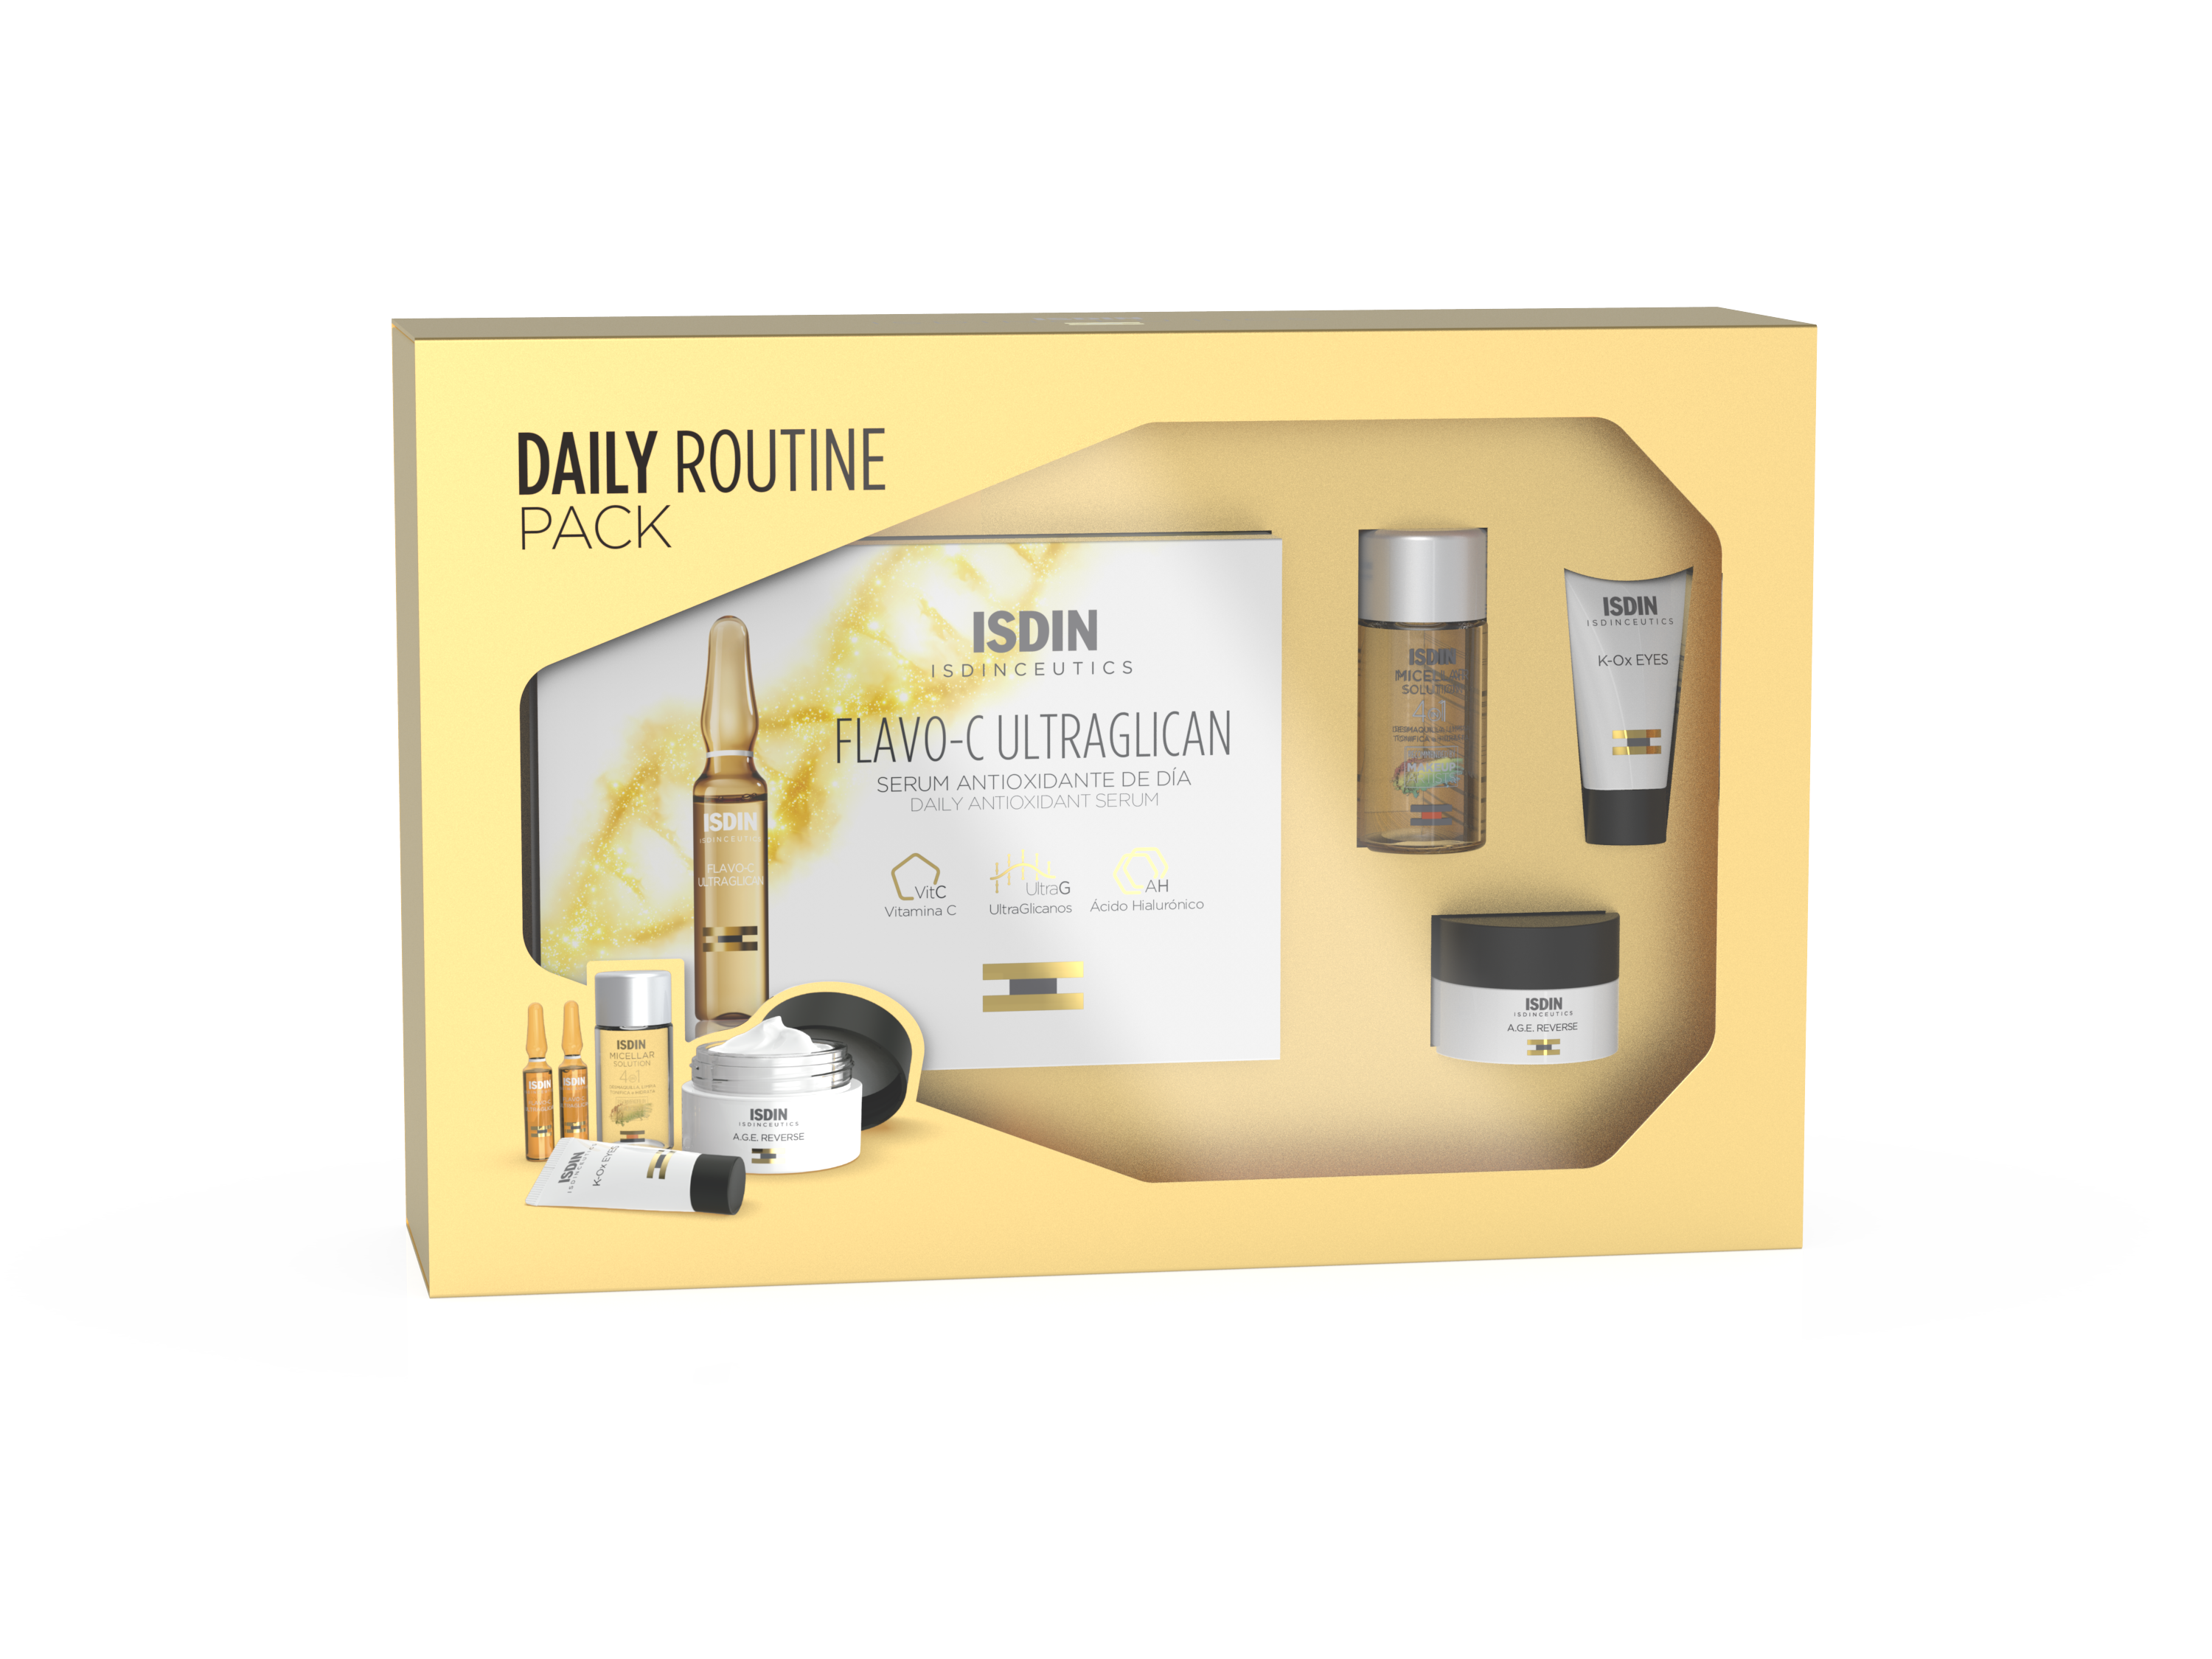 ISDIN_PACK DAILY ROUTINE PVPR 19.66 EUR